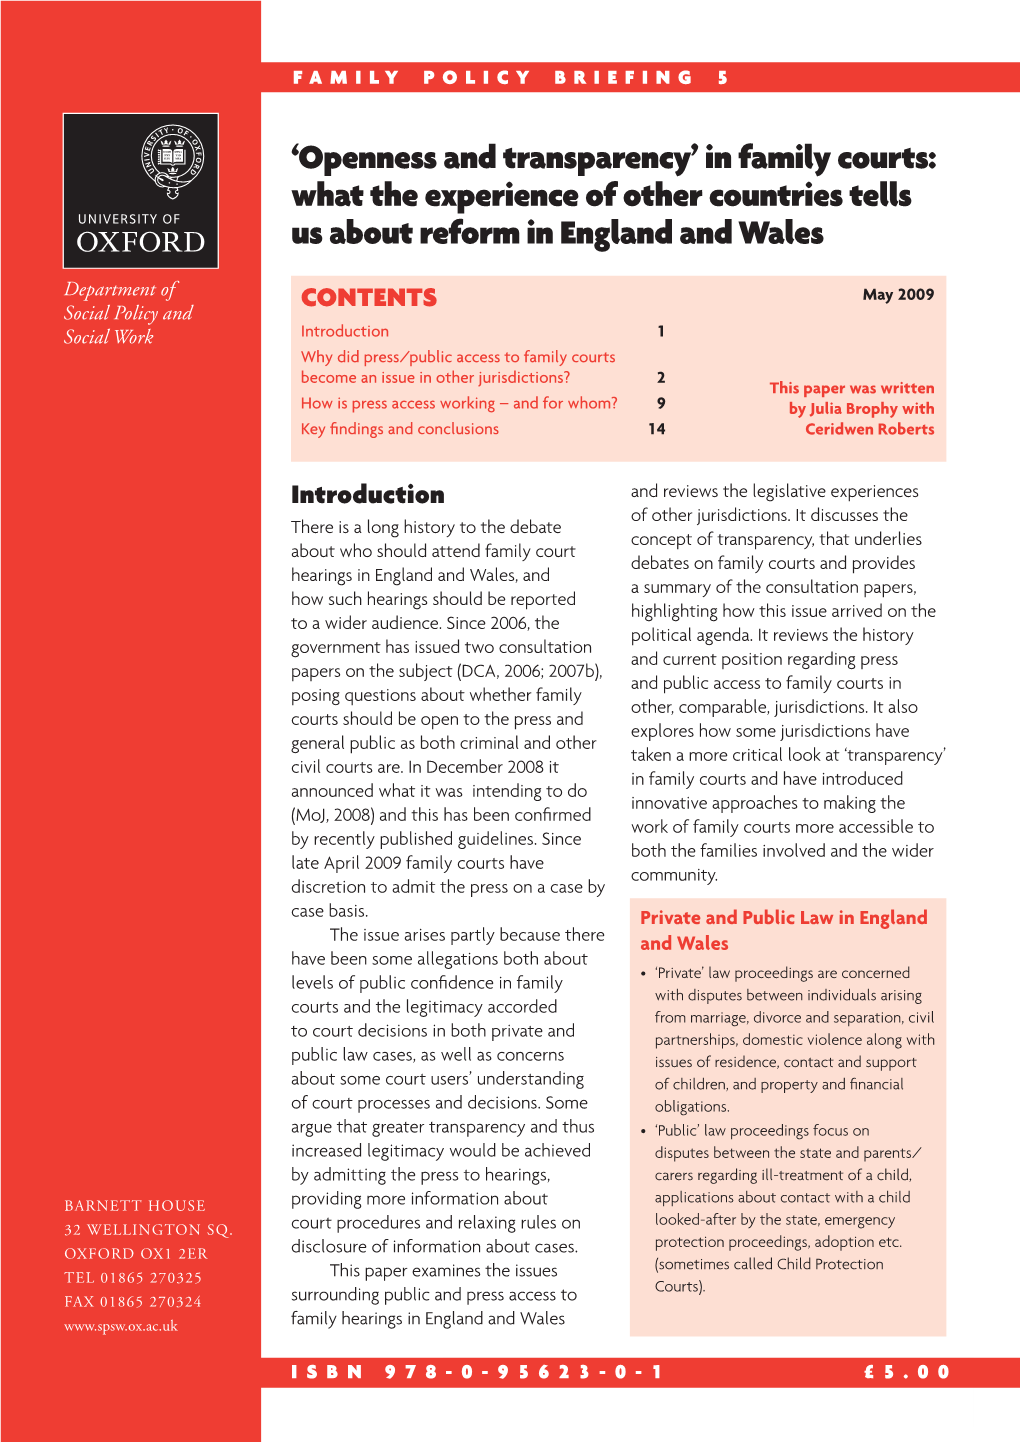 In Family Courts: What the Experience of Other Countries Tells Us About Reform in England and Wales